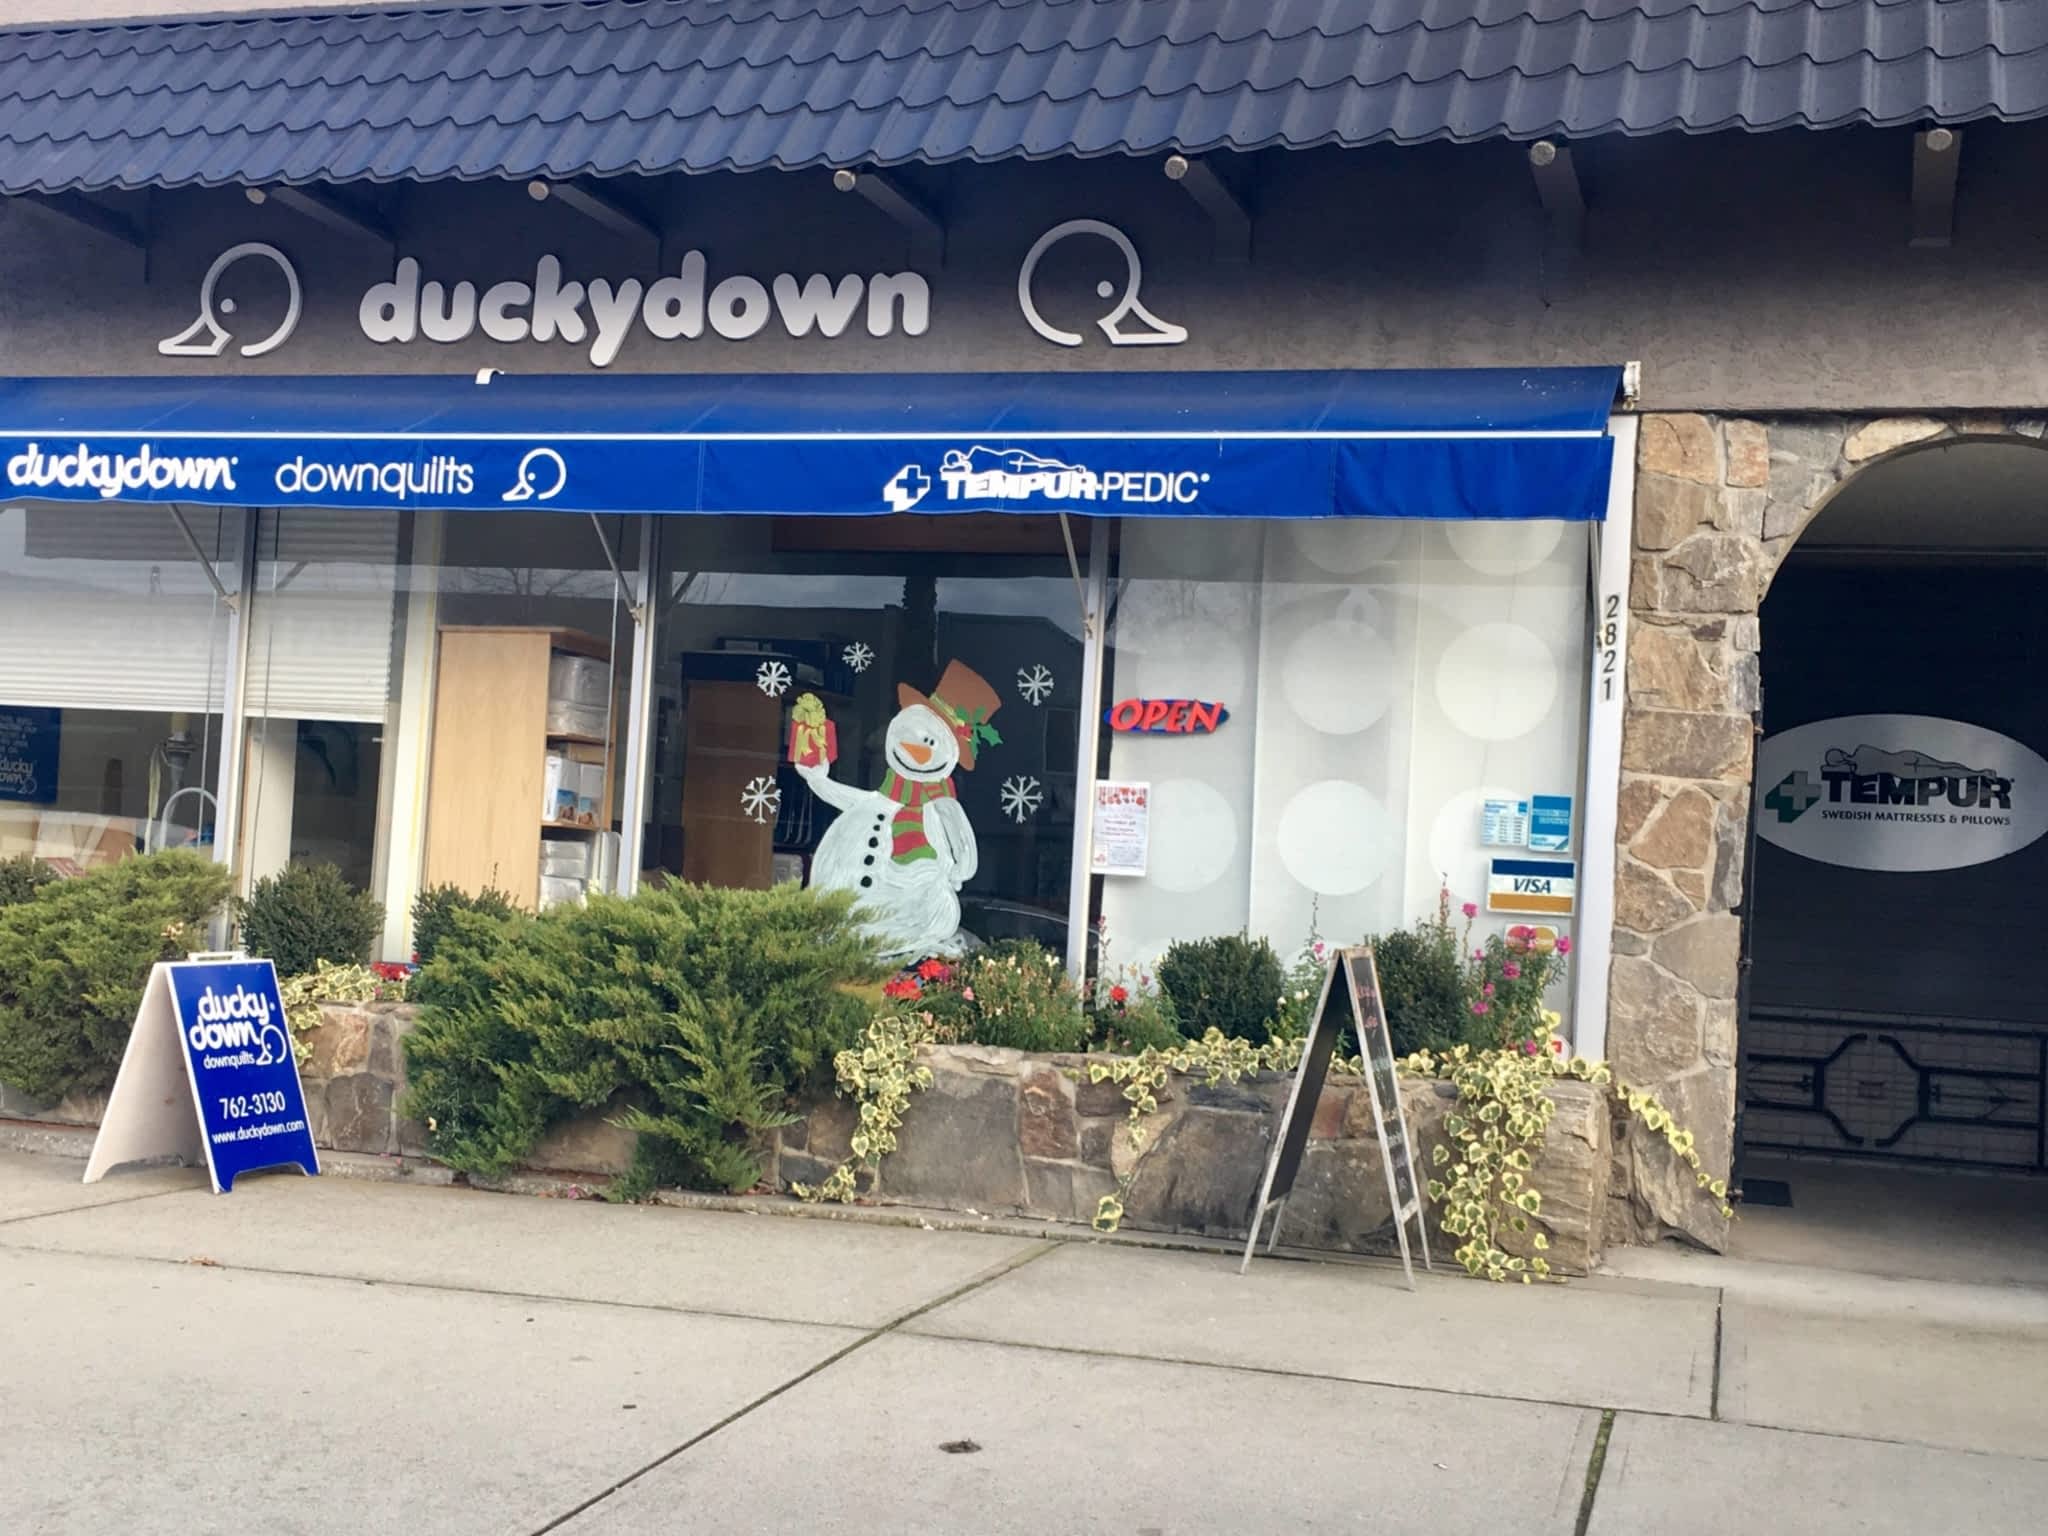 photo Ducky Down Downquilts Inc